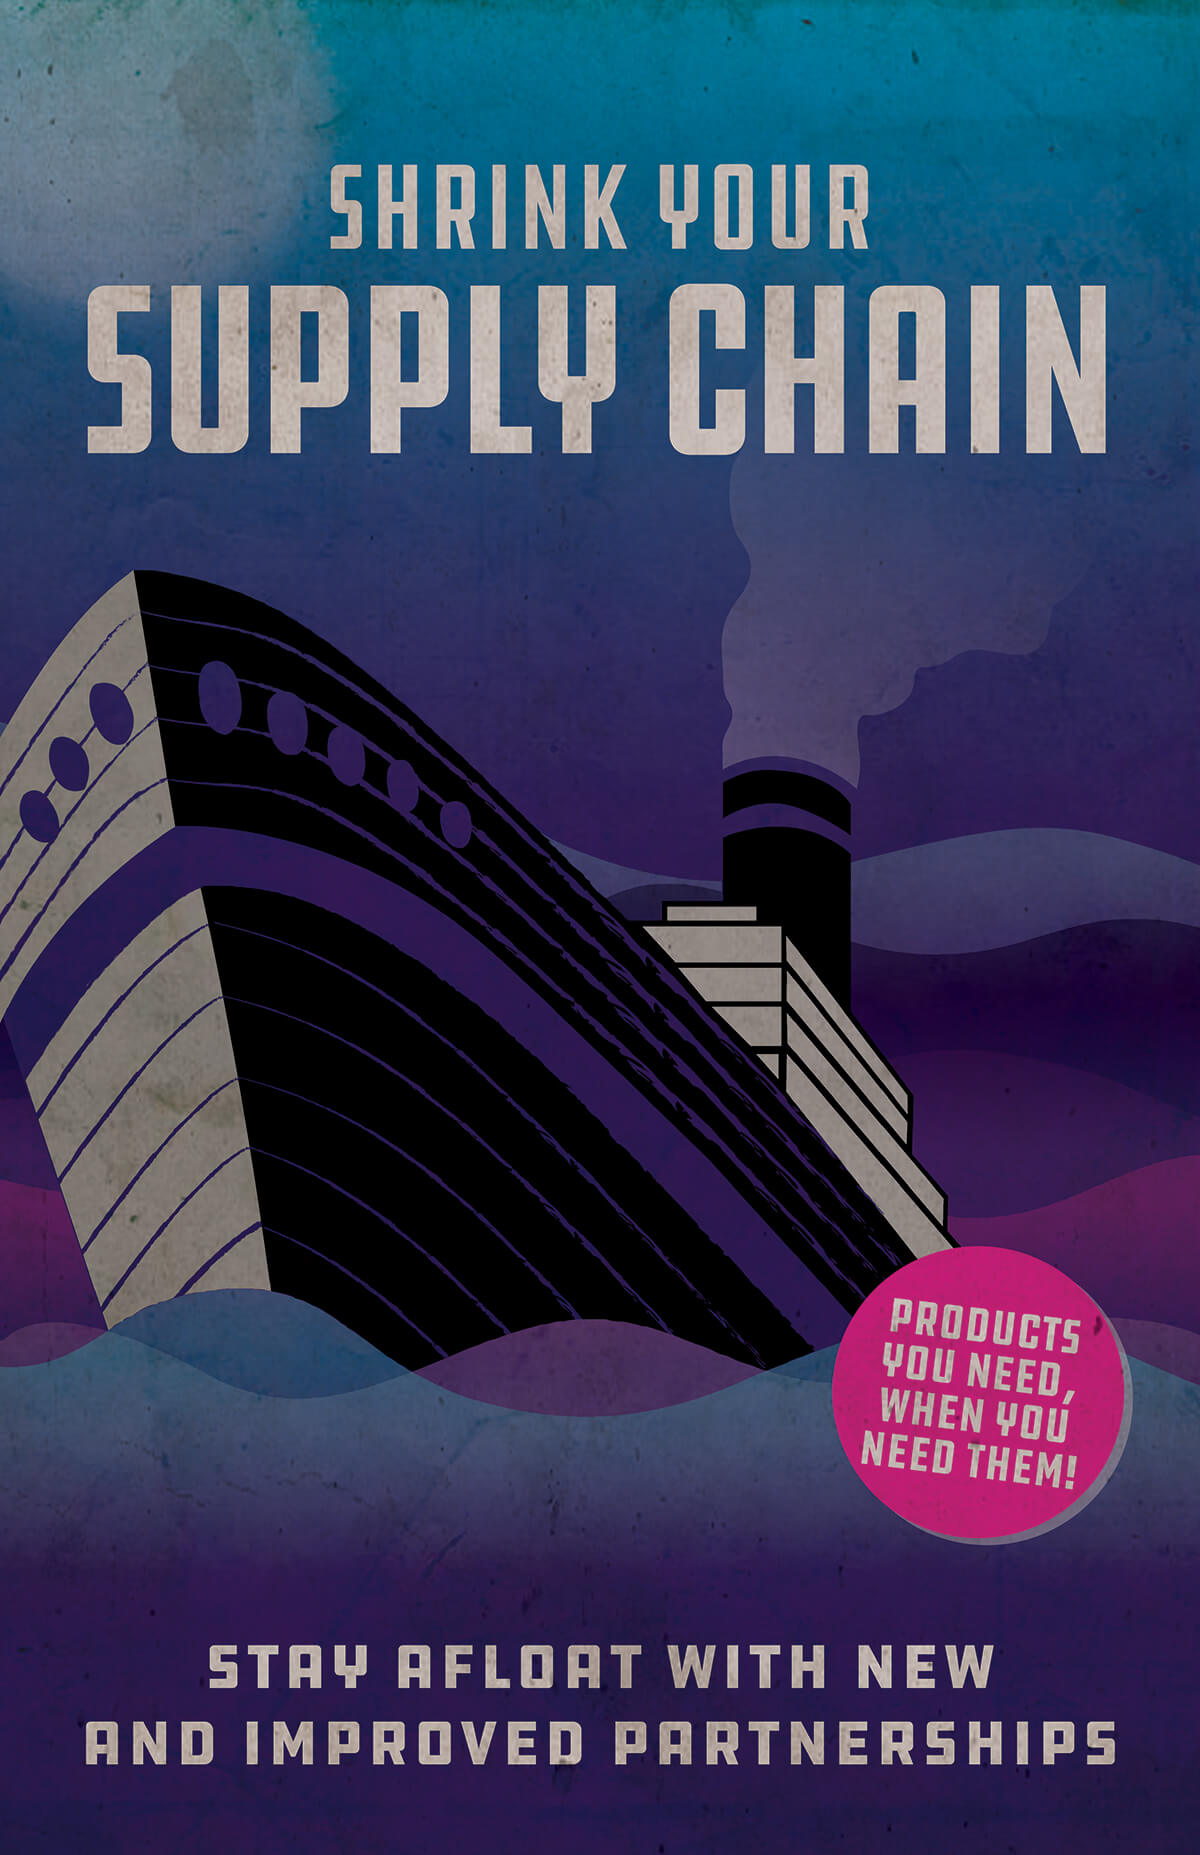 A mock travel poster with the words Shrink Your Supply Chain and a large ship.